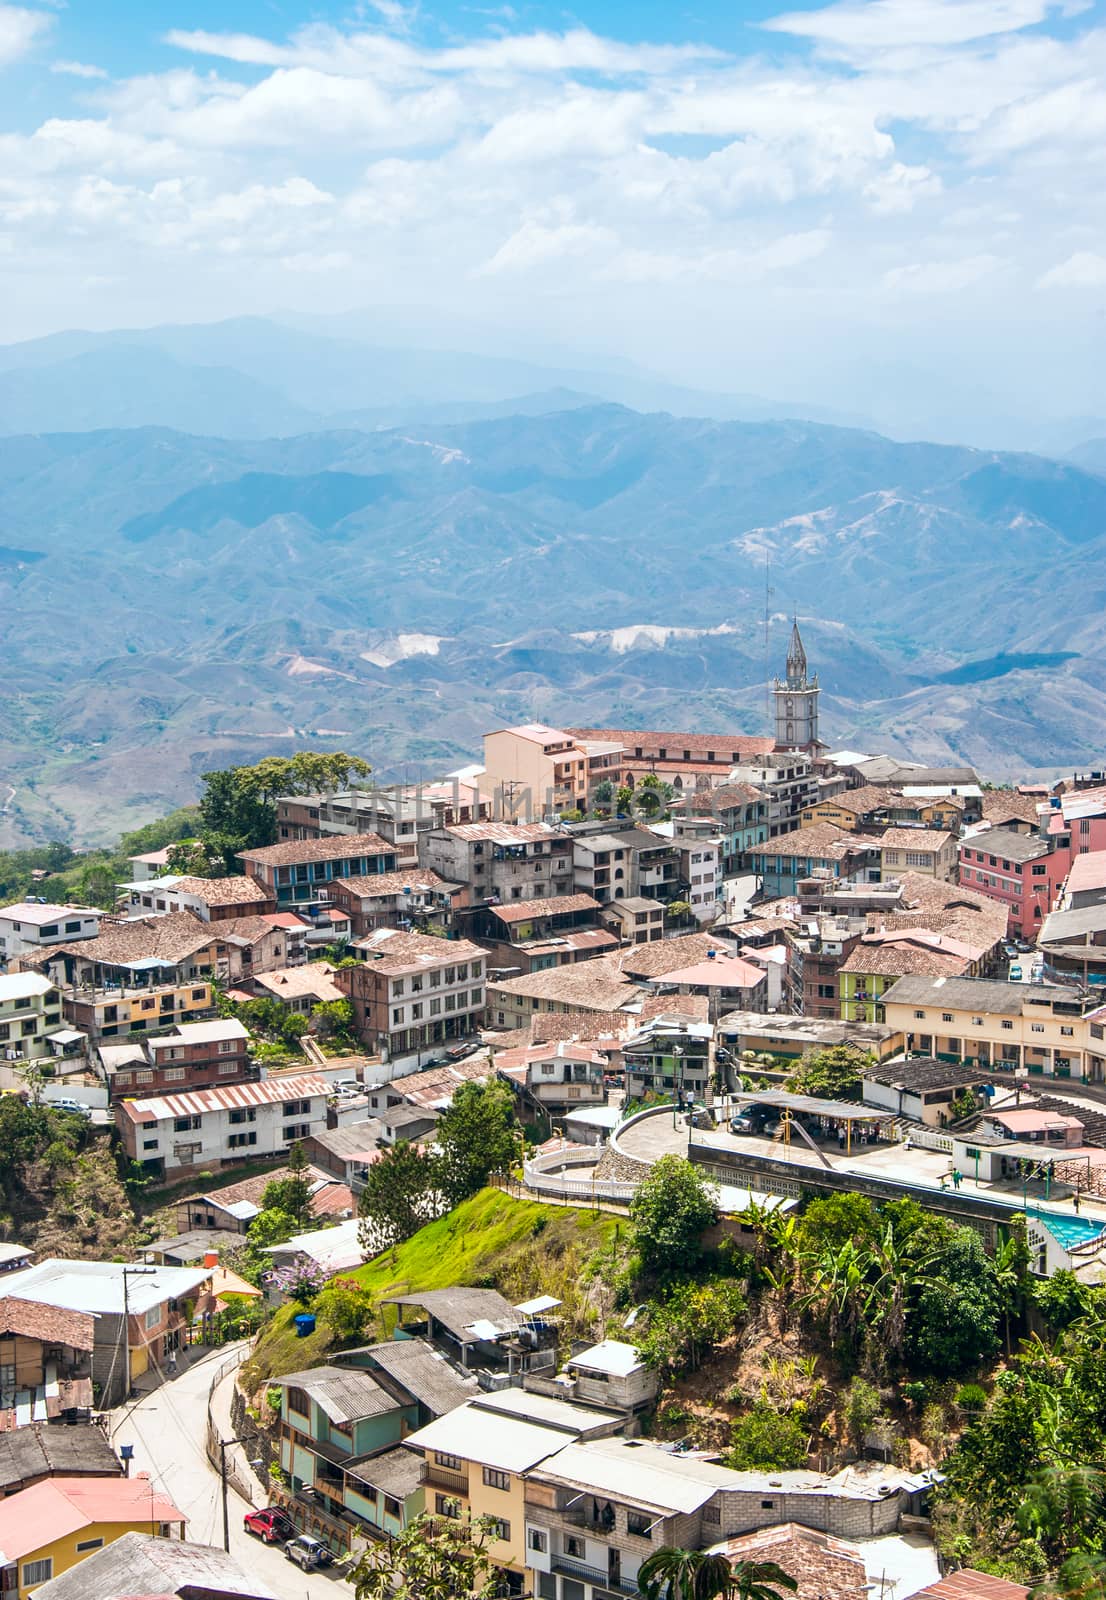 Zaruma - Town in the Andes, Ecuador. Located in the southern province of El Oro (meaning "the gold") in the western range of the Andes, Zaruma is a lovely hilltop town with steep twisted streets